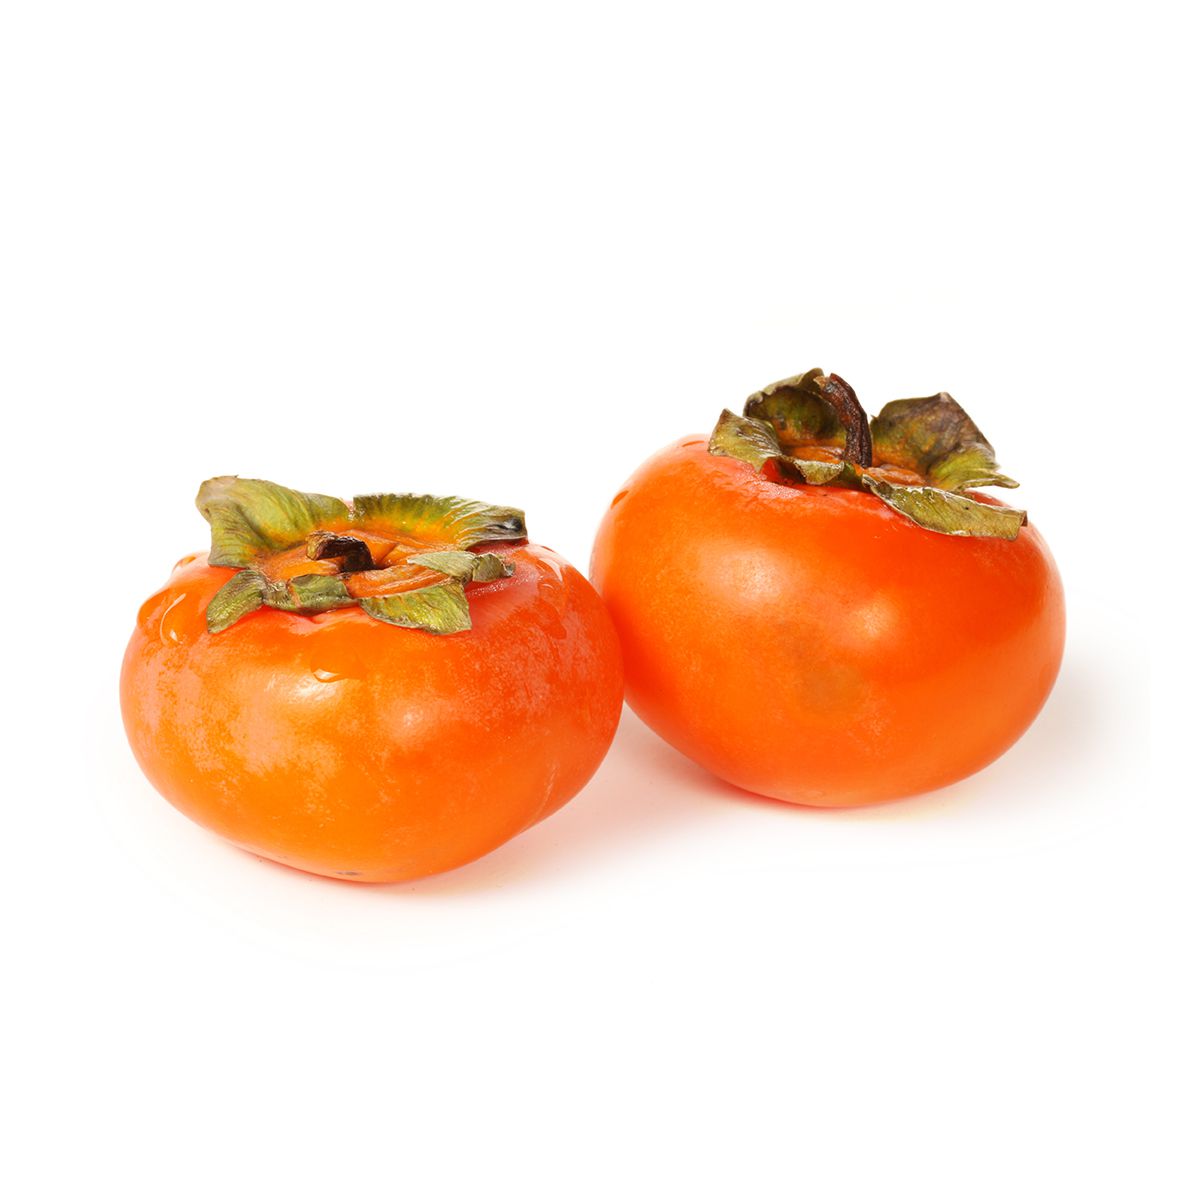 MISSING WEIGHT - BoxNCase Fuyu Persimmons